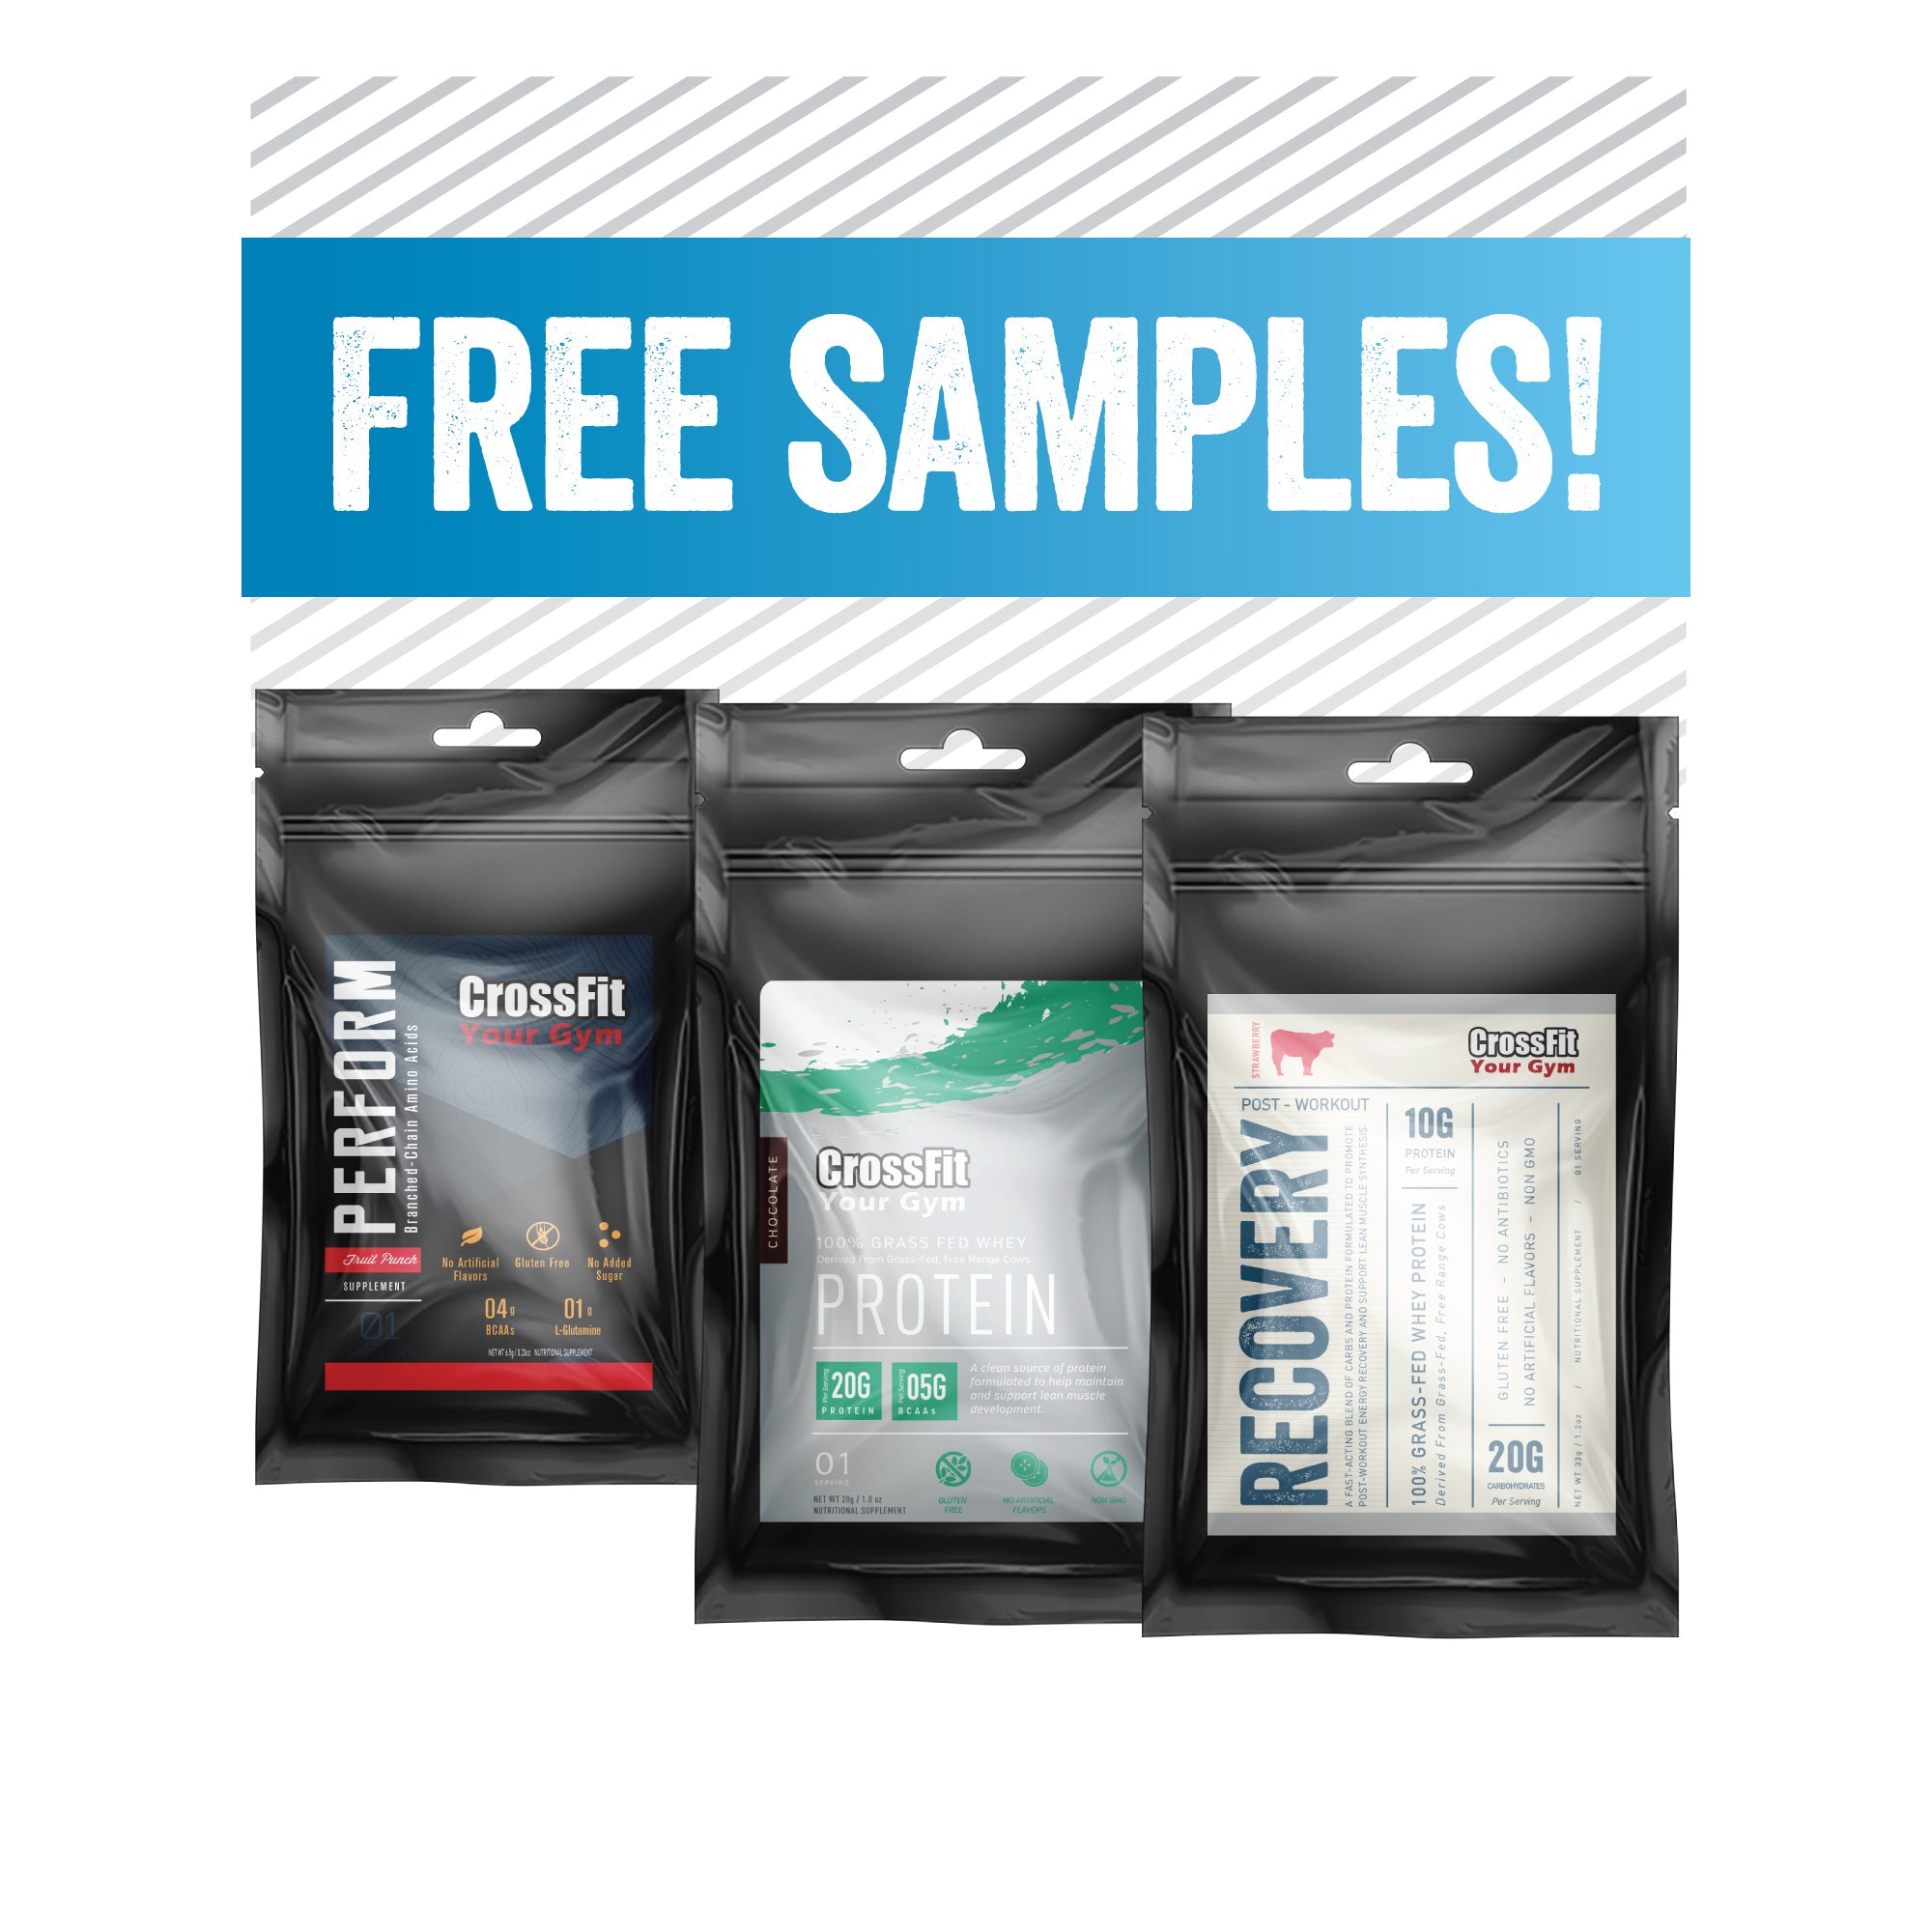 16 Ways to Get Free Supplement Samples Today!